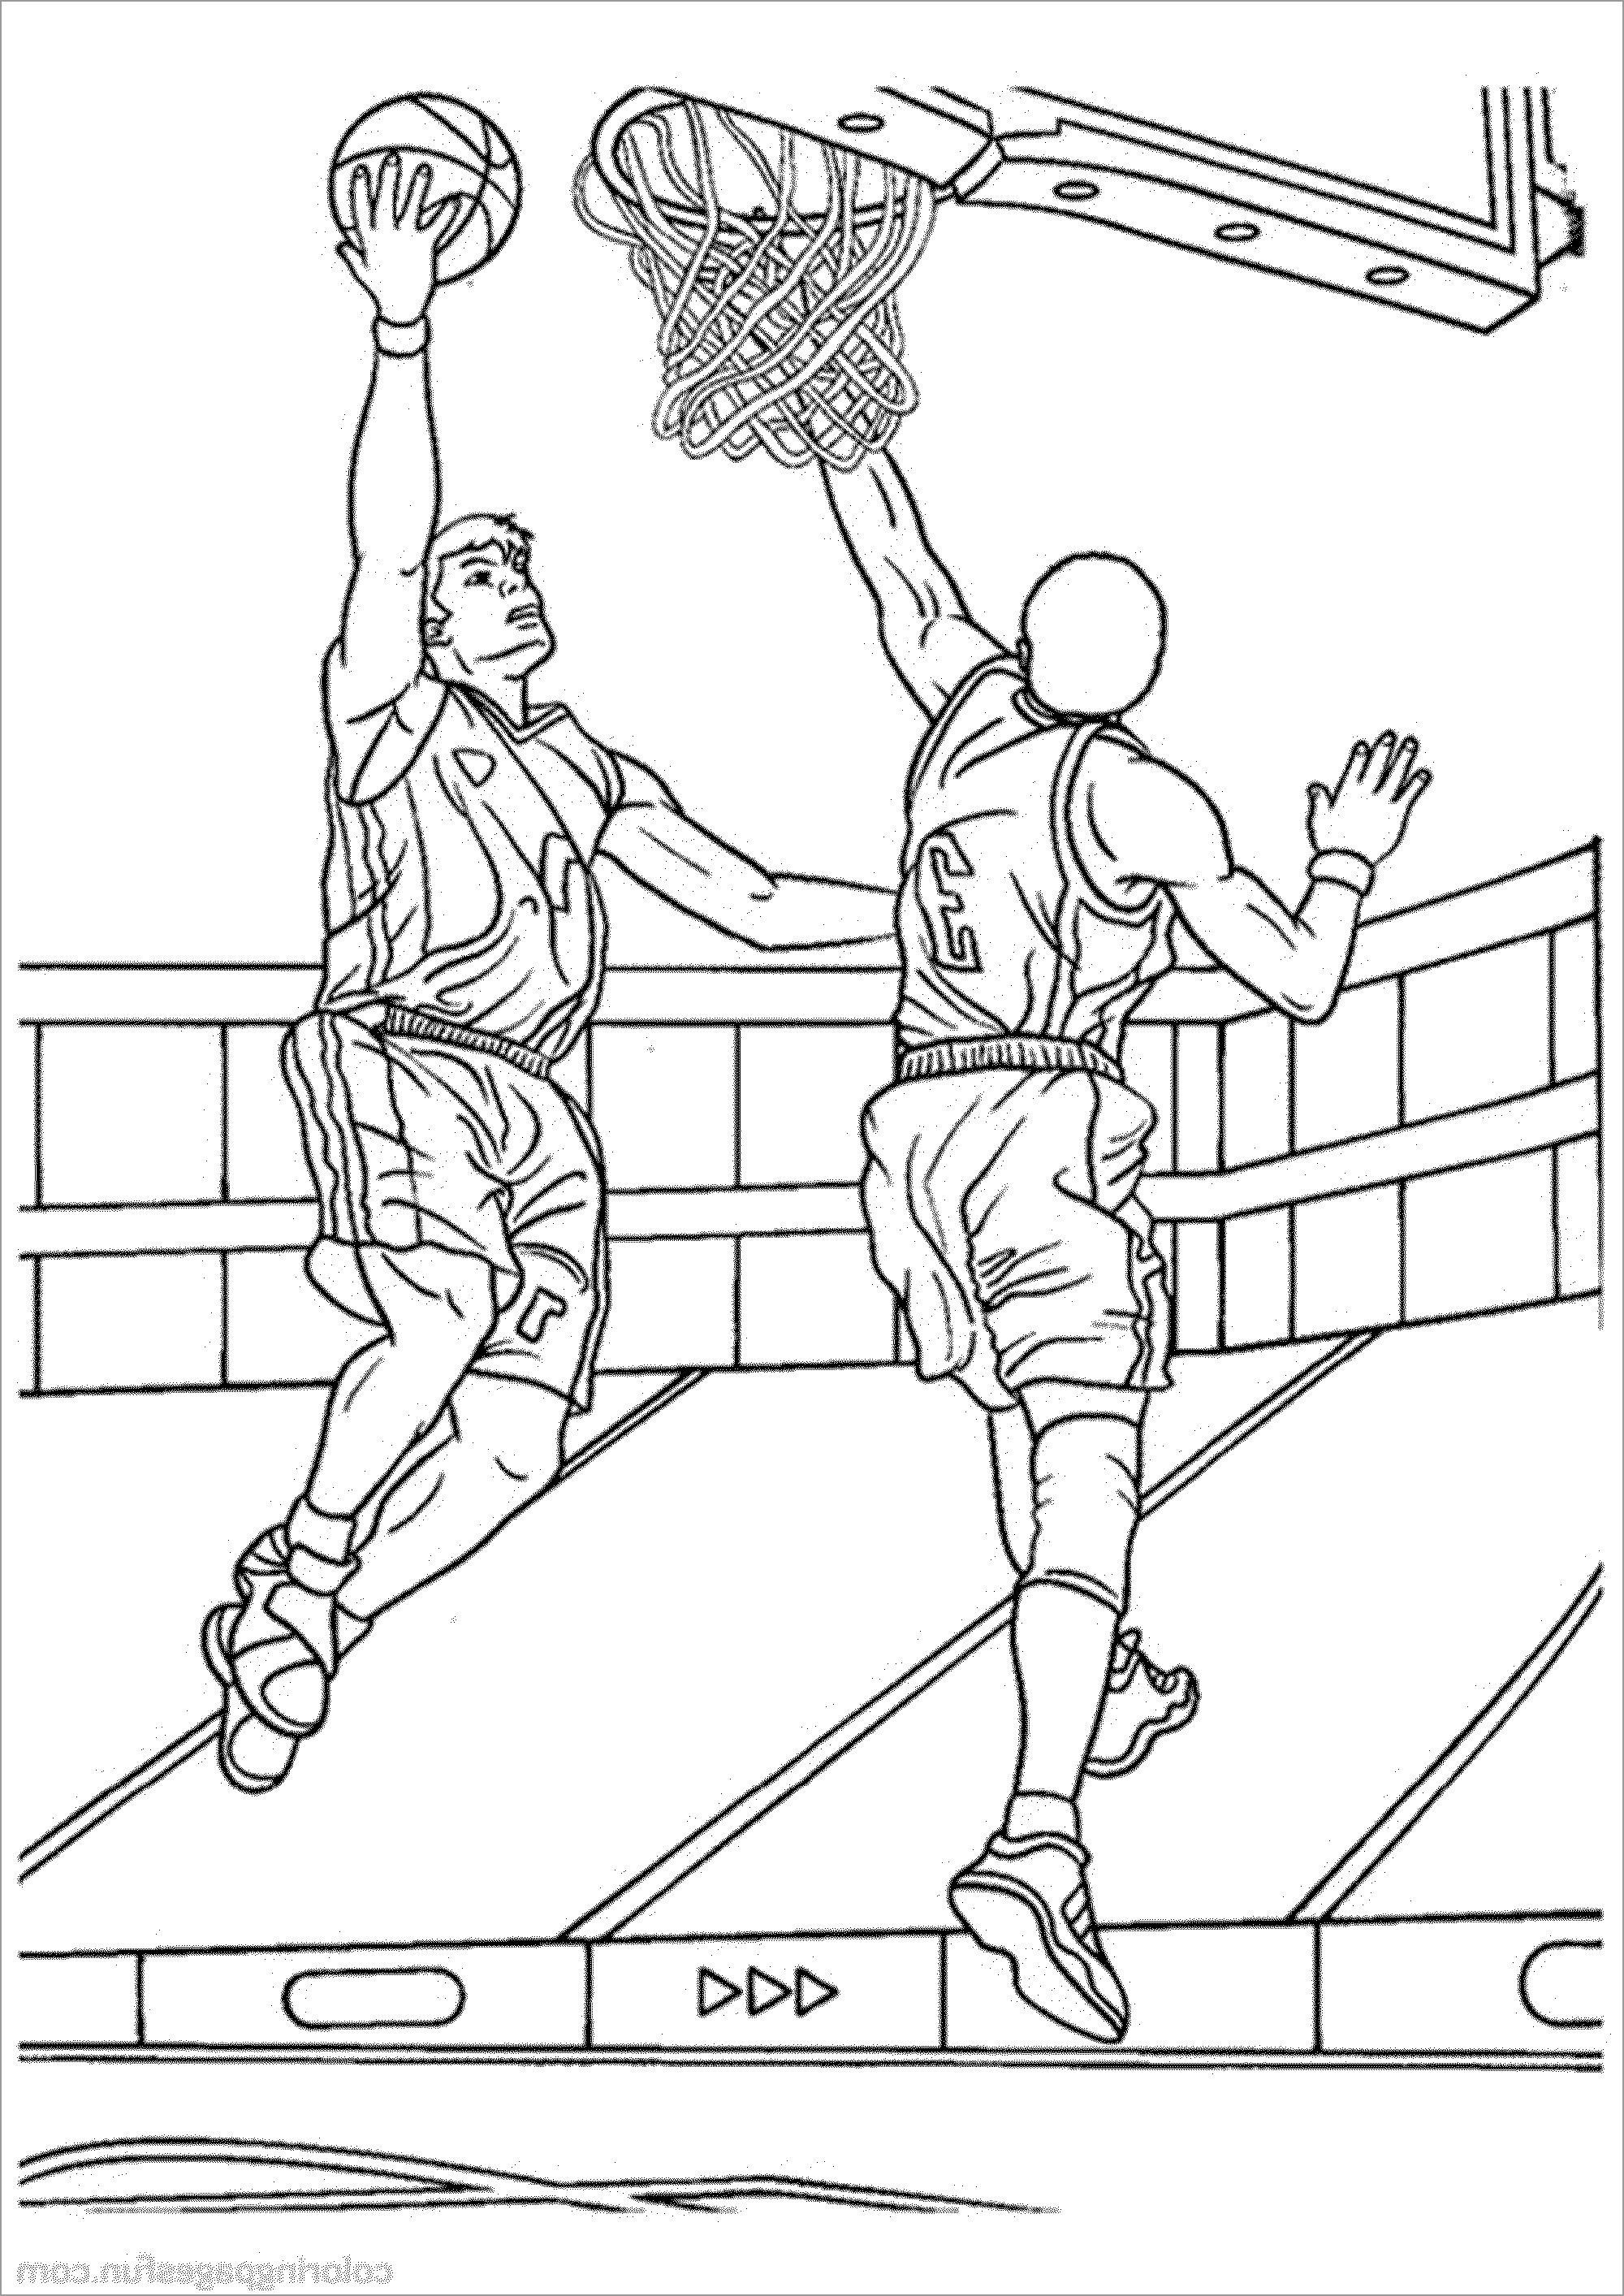 Basketball Coloring Pages to Print   ColoringBay